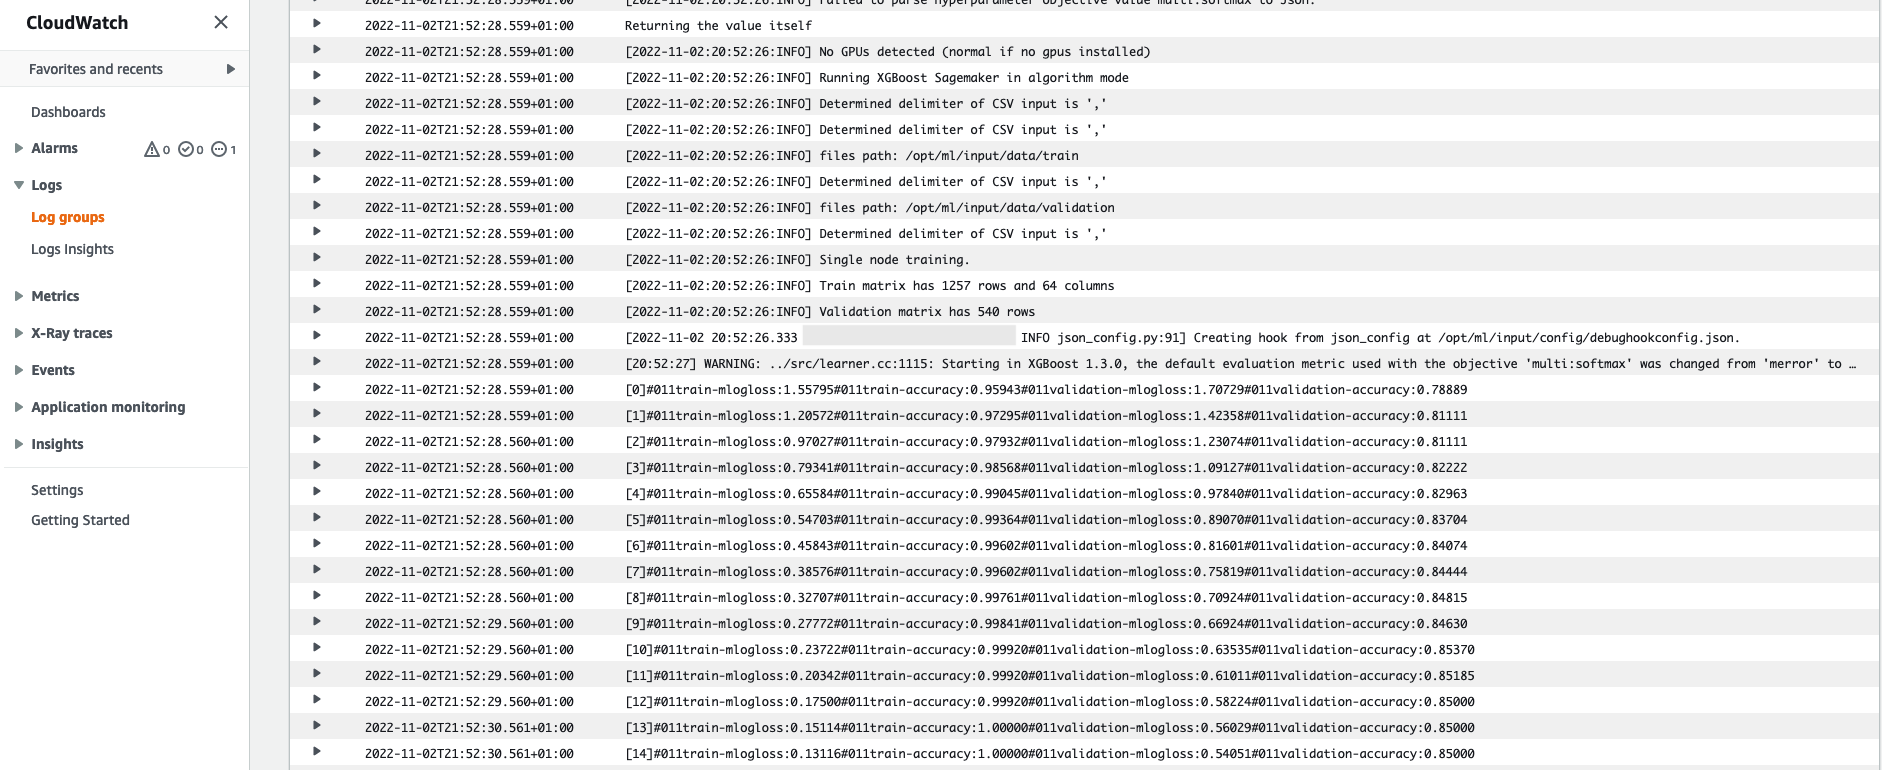 Console view of training instance logs in CloudWatch